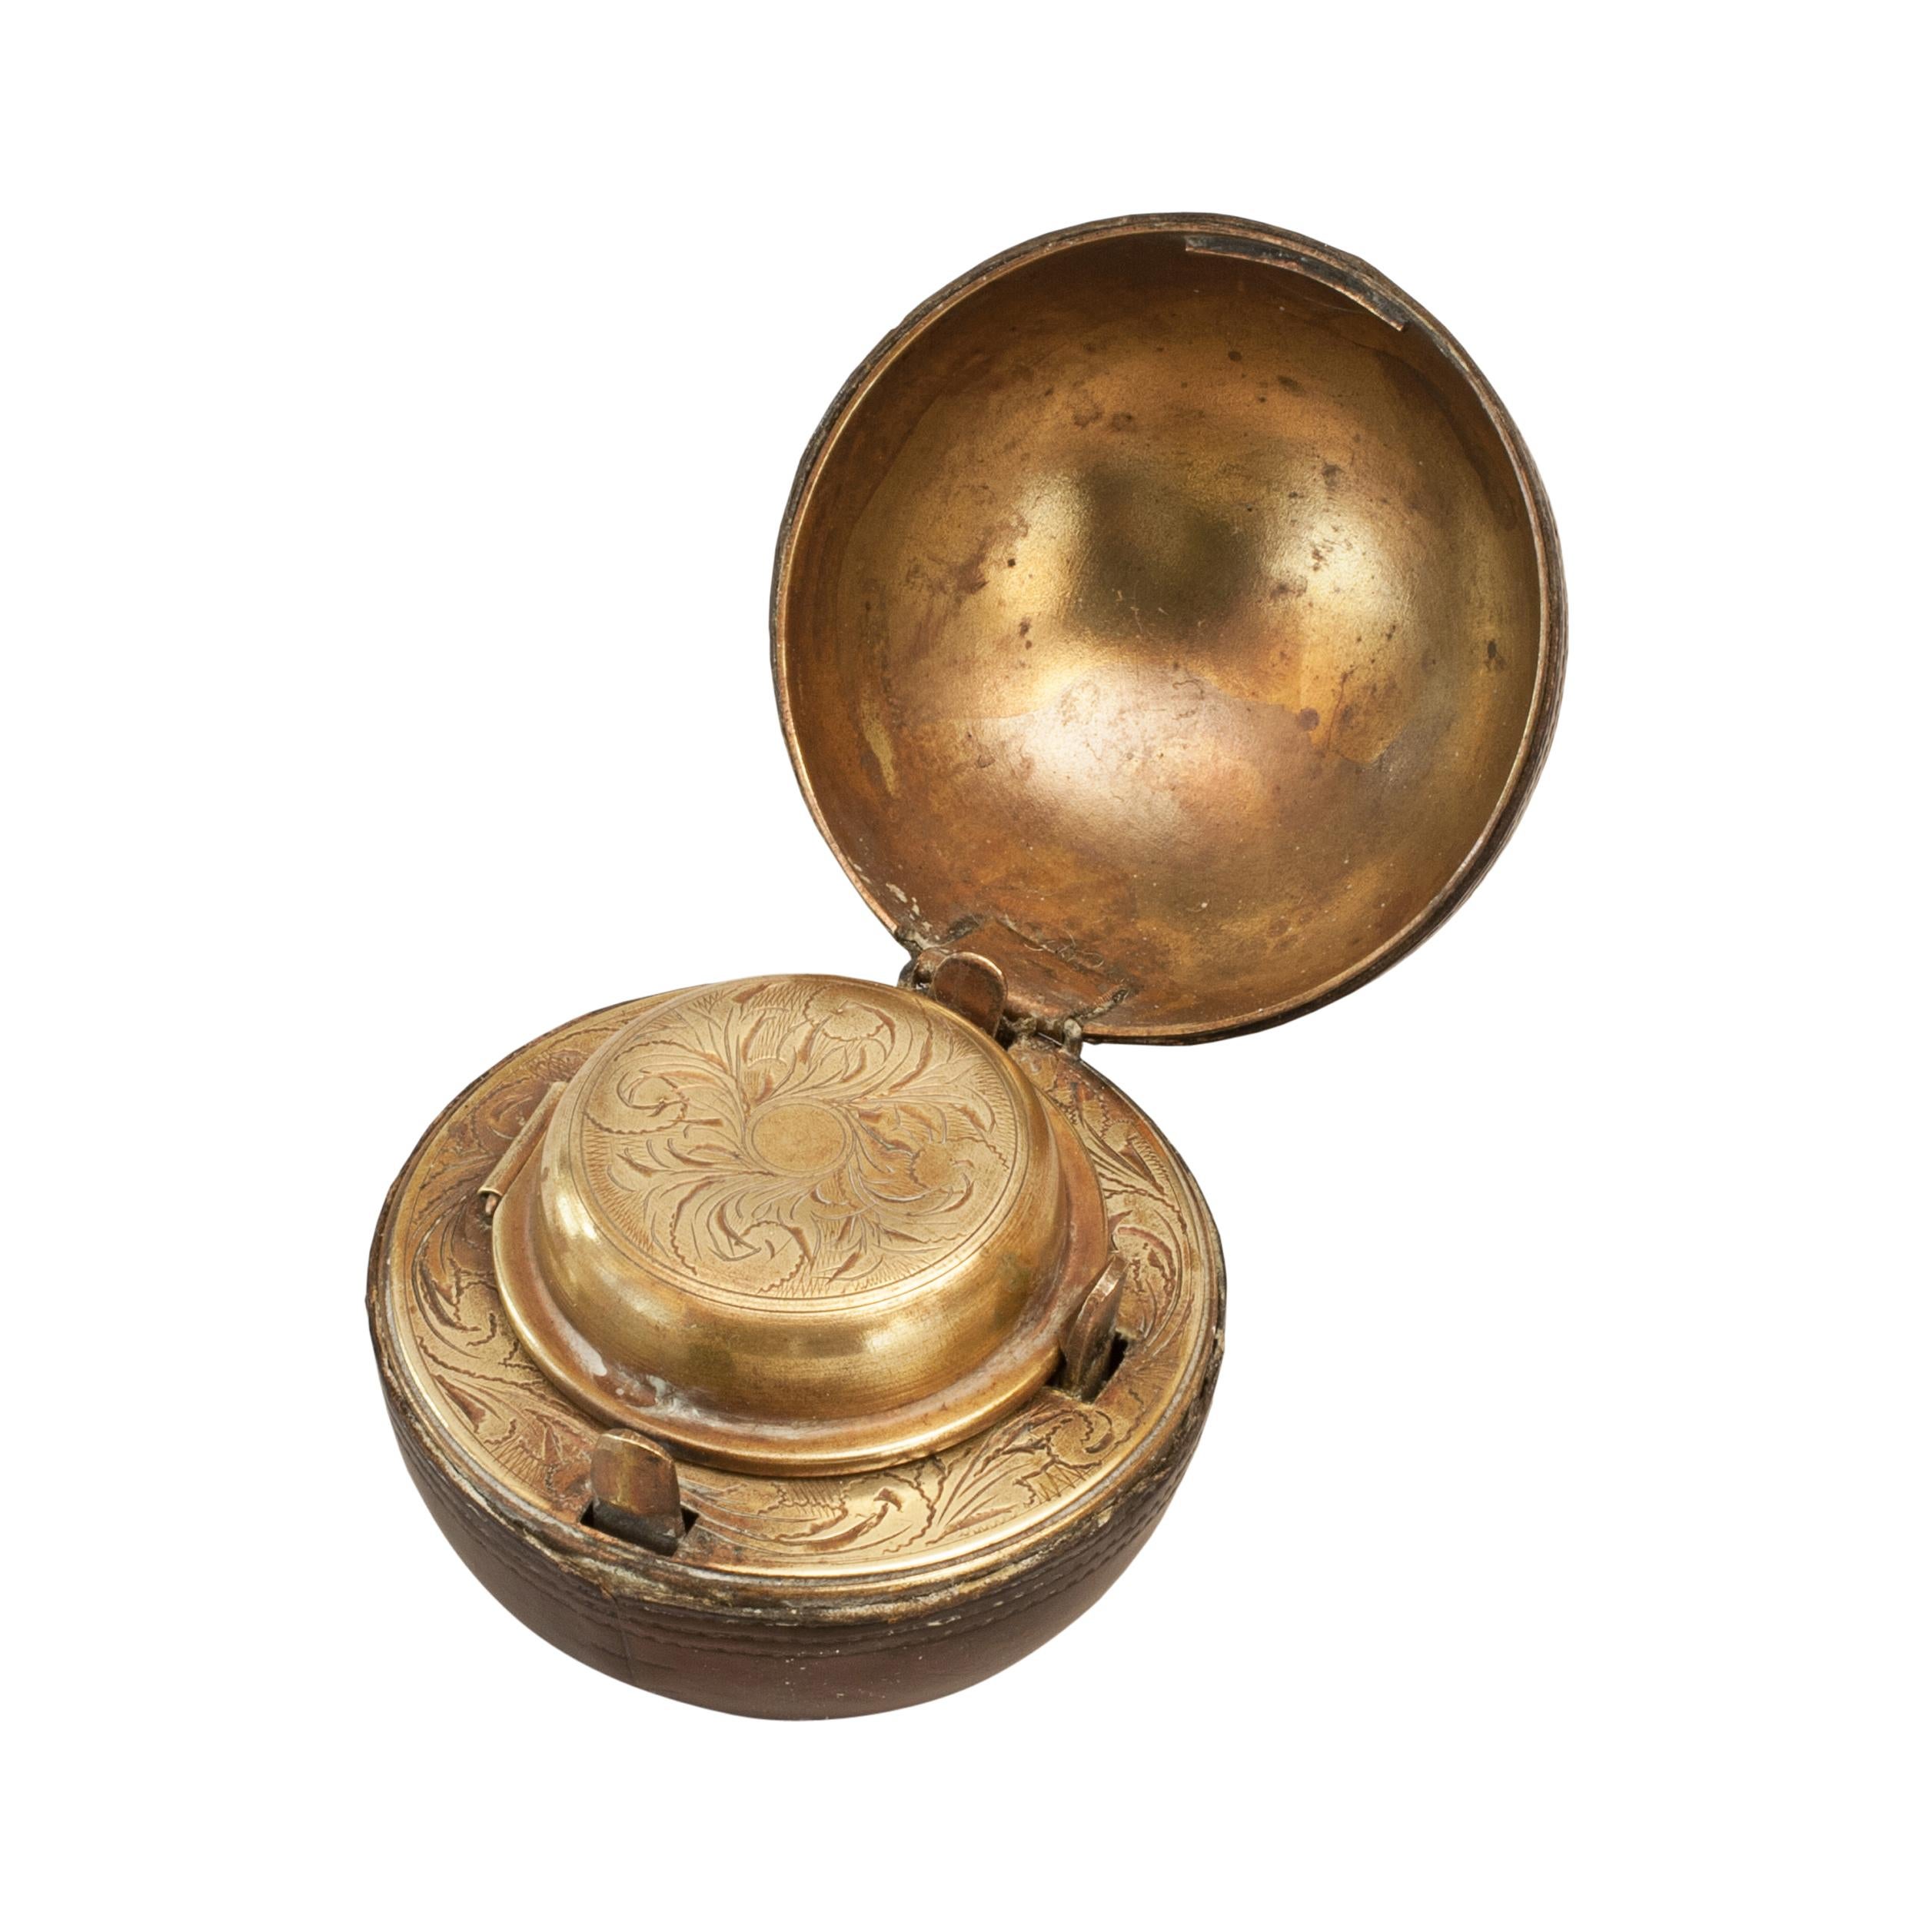 Rare Novelty Cricket Inkwell.
A wonderful leather covered traveling inkwell in the shape of a cricket ball. This is a very desirable, rare and unusual object made from brass and covered in imprinted leather to imitate a ball. It is hinged in the